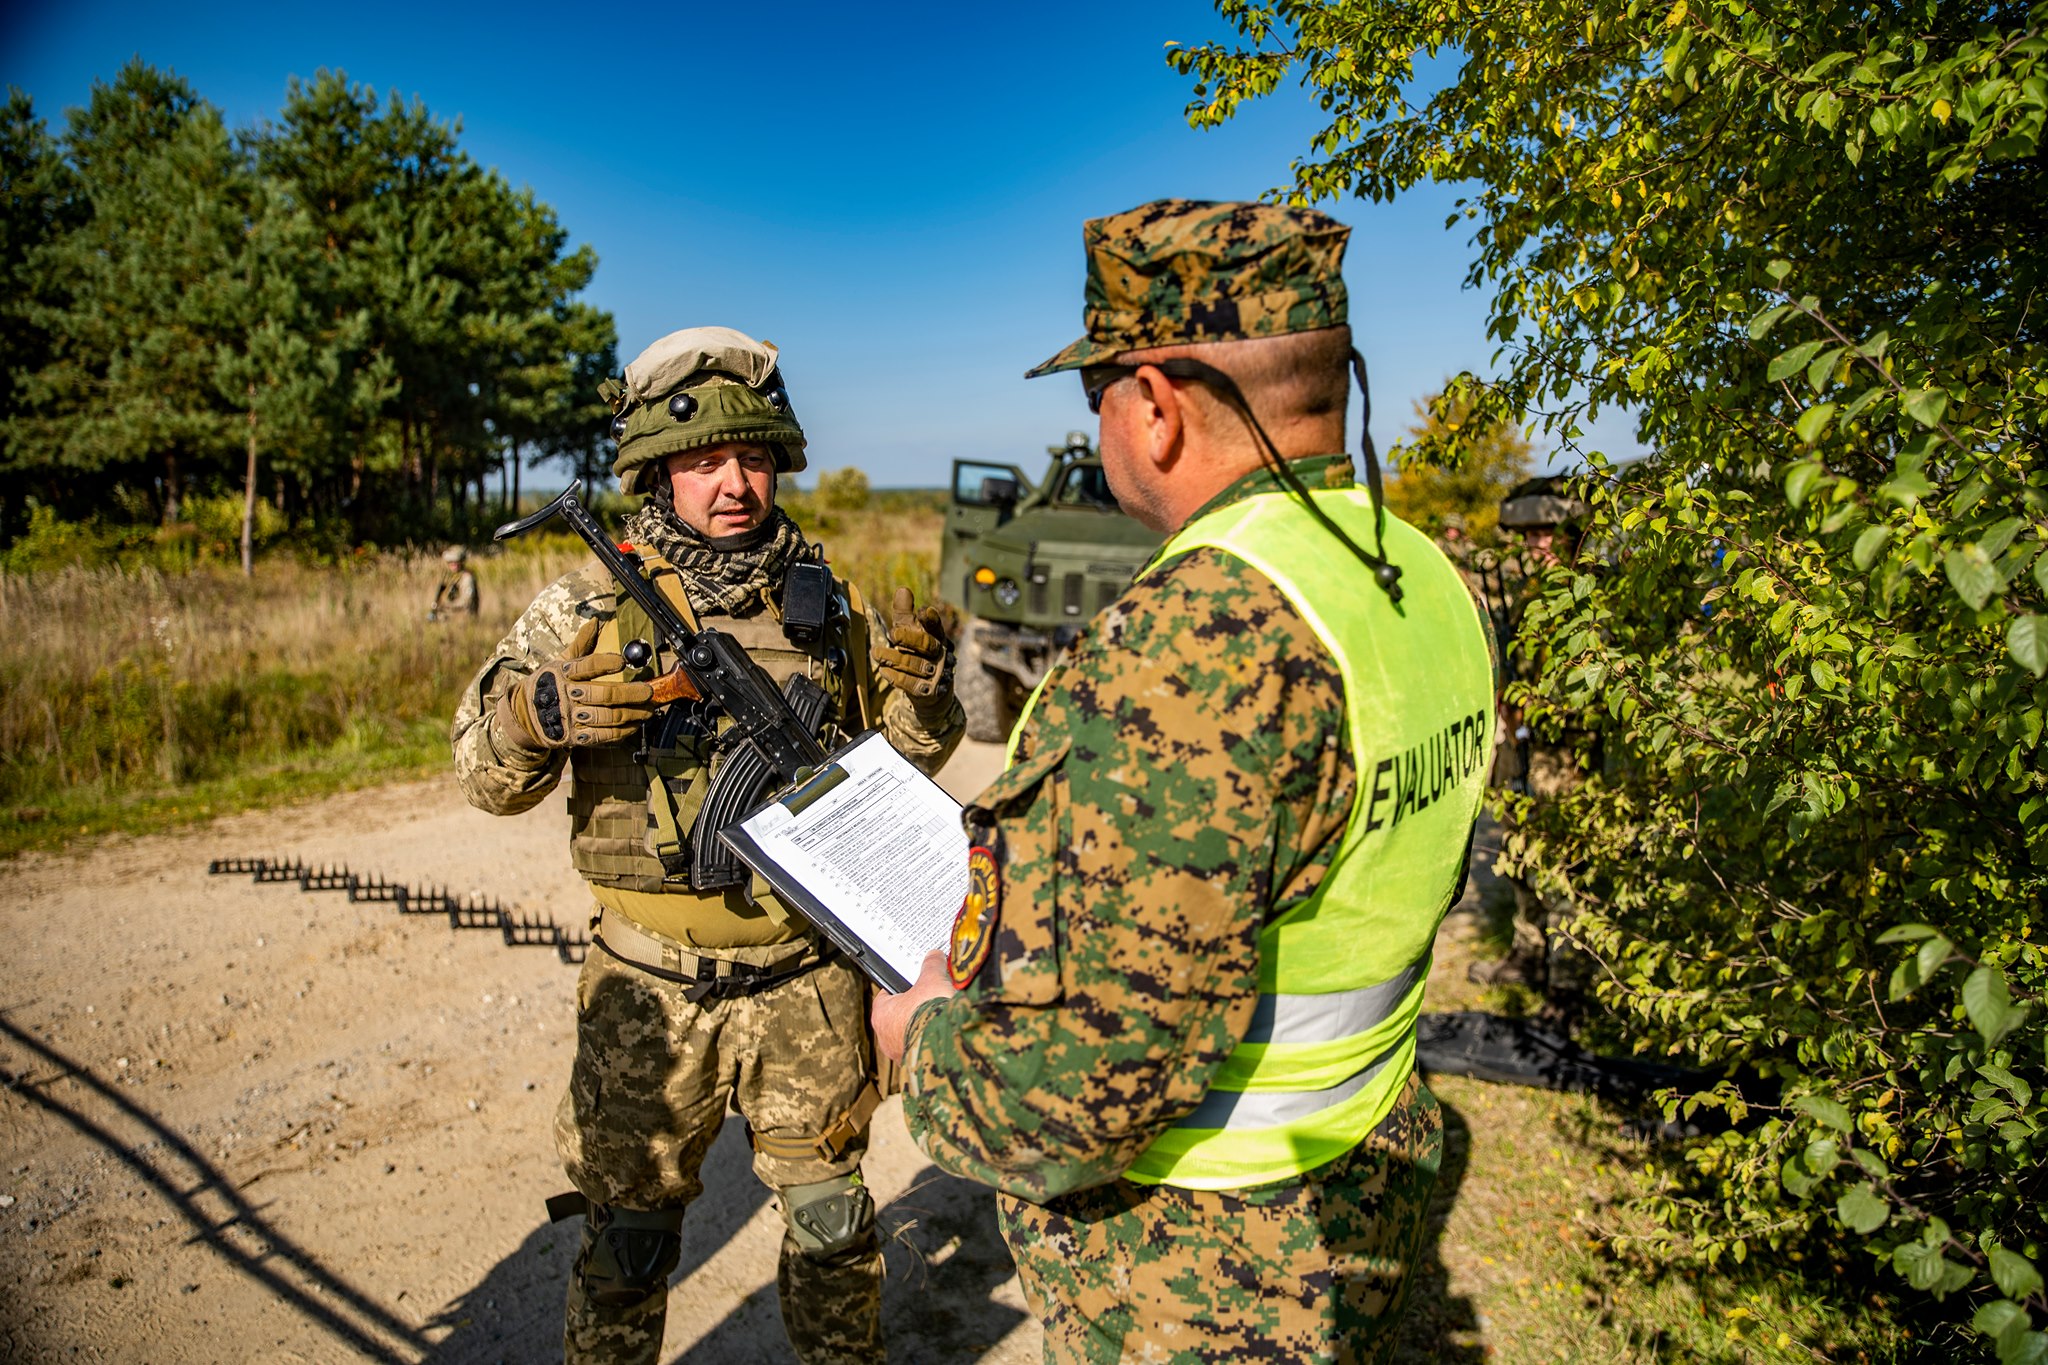 Training of specialists of the Military Law Enforcement Service